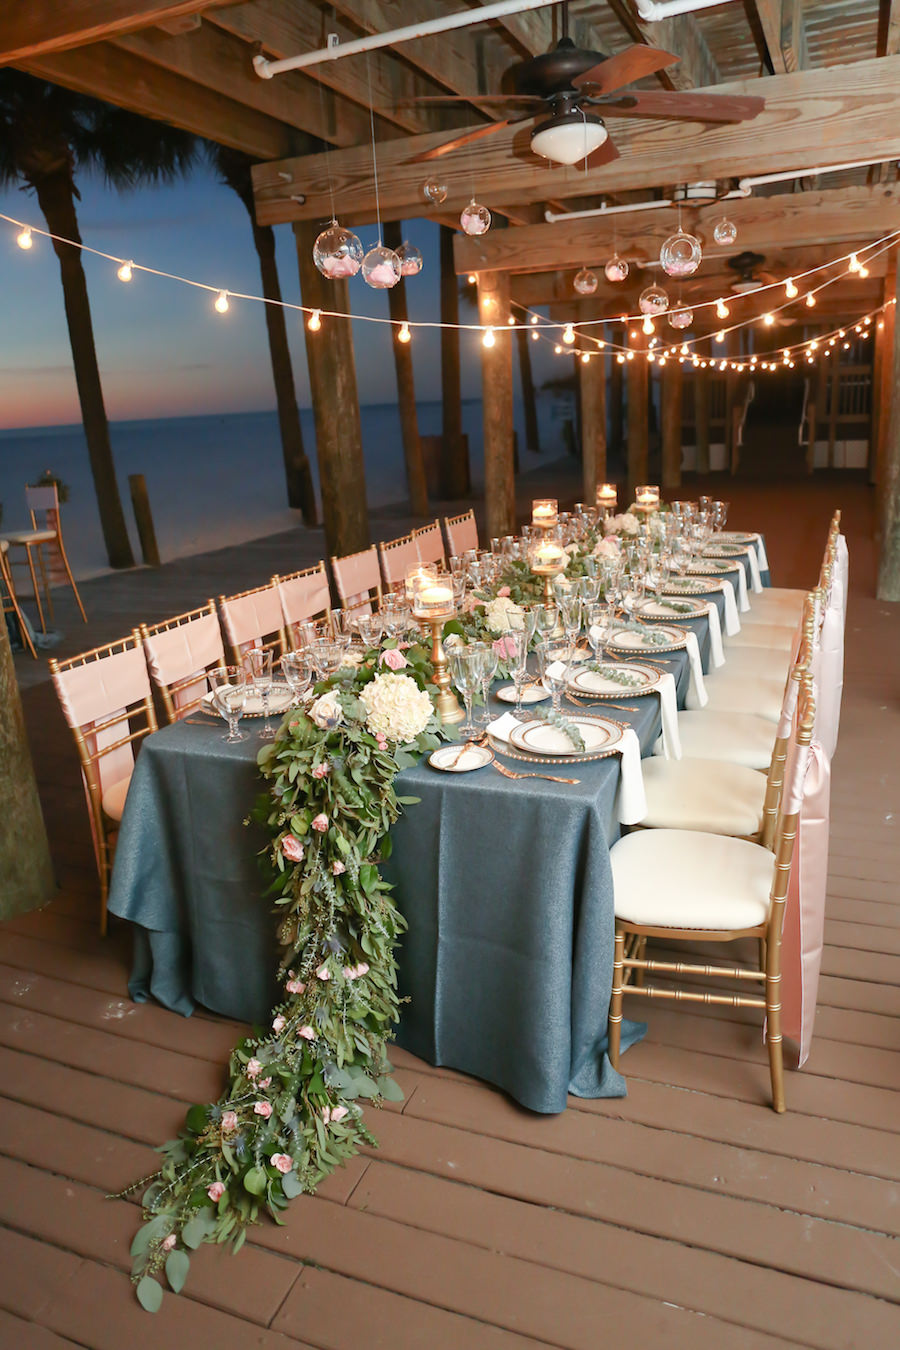 Bohemian Glam Beach Wedding with Navy Blue Burlap Linens and Floral Garland Centerpieces on Long Feasting Tables at Clearwater Beach Wedding Venue Hilton Clearwater Beach | Linens by Over The Top Rental Linens | China/Glassware by A Chair Affair | Gold Chiavari Chairs and Beaded Glass Chargers from Signature Event Rentals